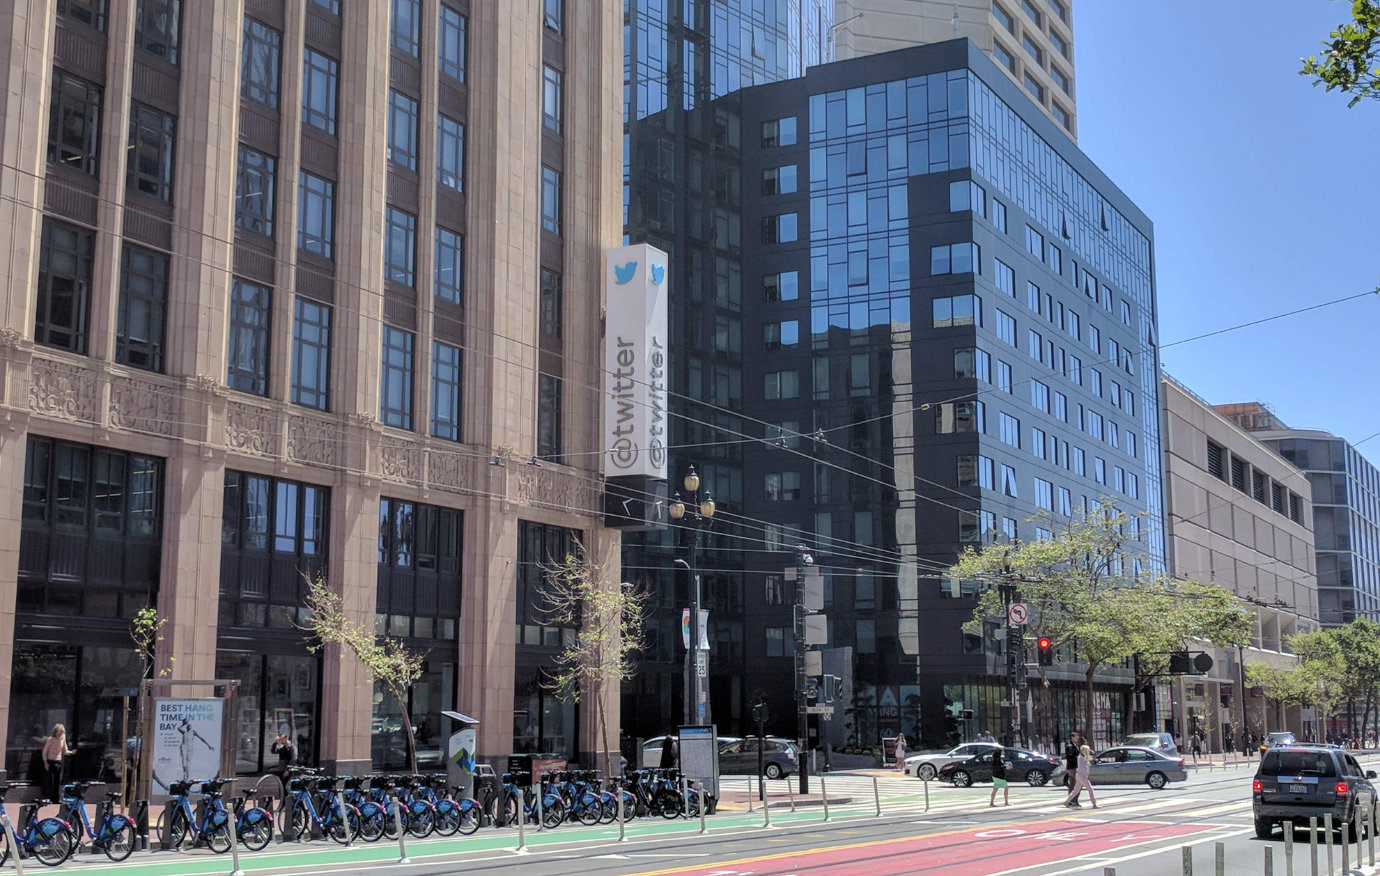 An angled photo of Twitter’s headquarters building, on a sunny day in San Francisco. A vertical sign saying “@twitter” is attached to the side of a brick-and-glass building. A long stand of municipal rental bikes, a bike lane, and tram tracks are visible in front, and to the right, another set of office buildings are visible behind an intersection with passing cars and pedestrians.